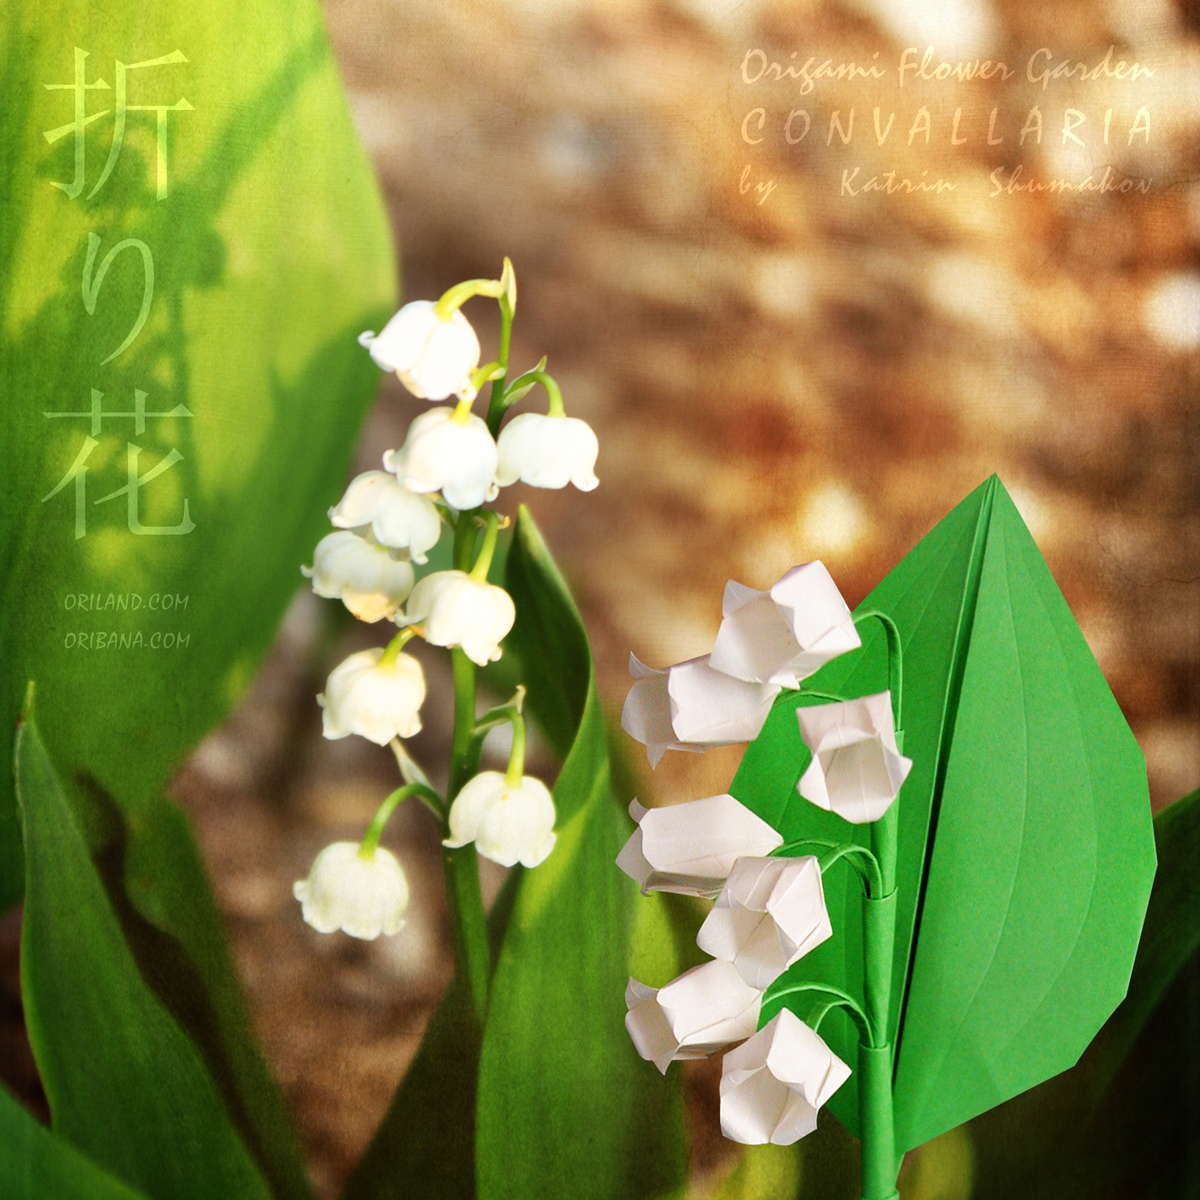 Lily-of-the-Valley - the real ones & origami sisters :-)

#Origami #Flower #Garden. Convallaria

Convallaria (Lily-of-the-Valley) designed by Katrin Shumakov (c)1998
Diagrams @ #ORIBANA CHARM collection 
oriland.com/store/collecti…

Happy folding!
#paper #art #designs